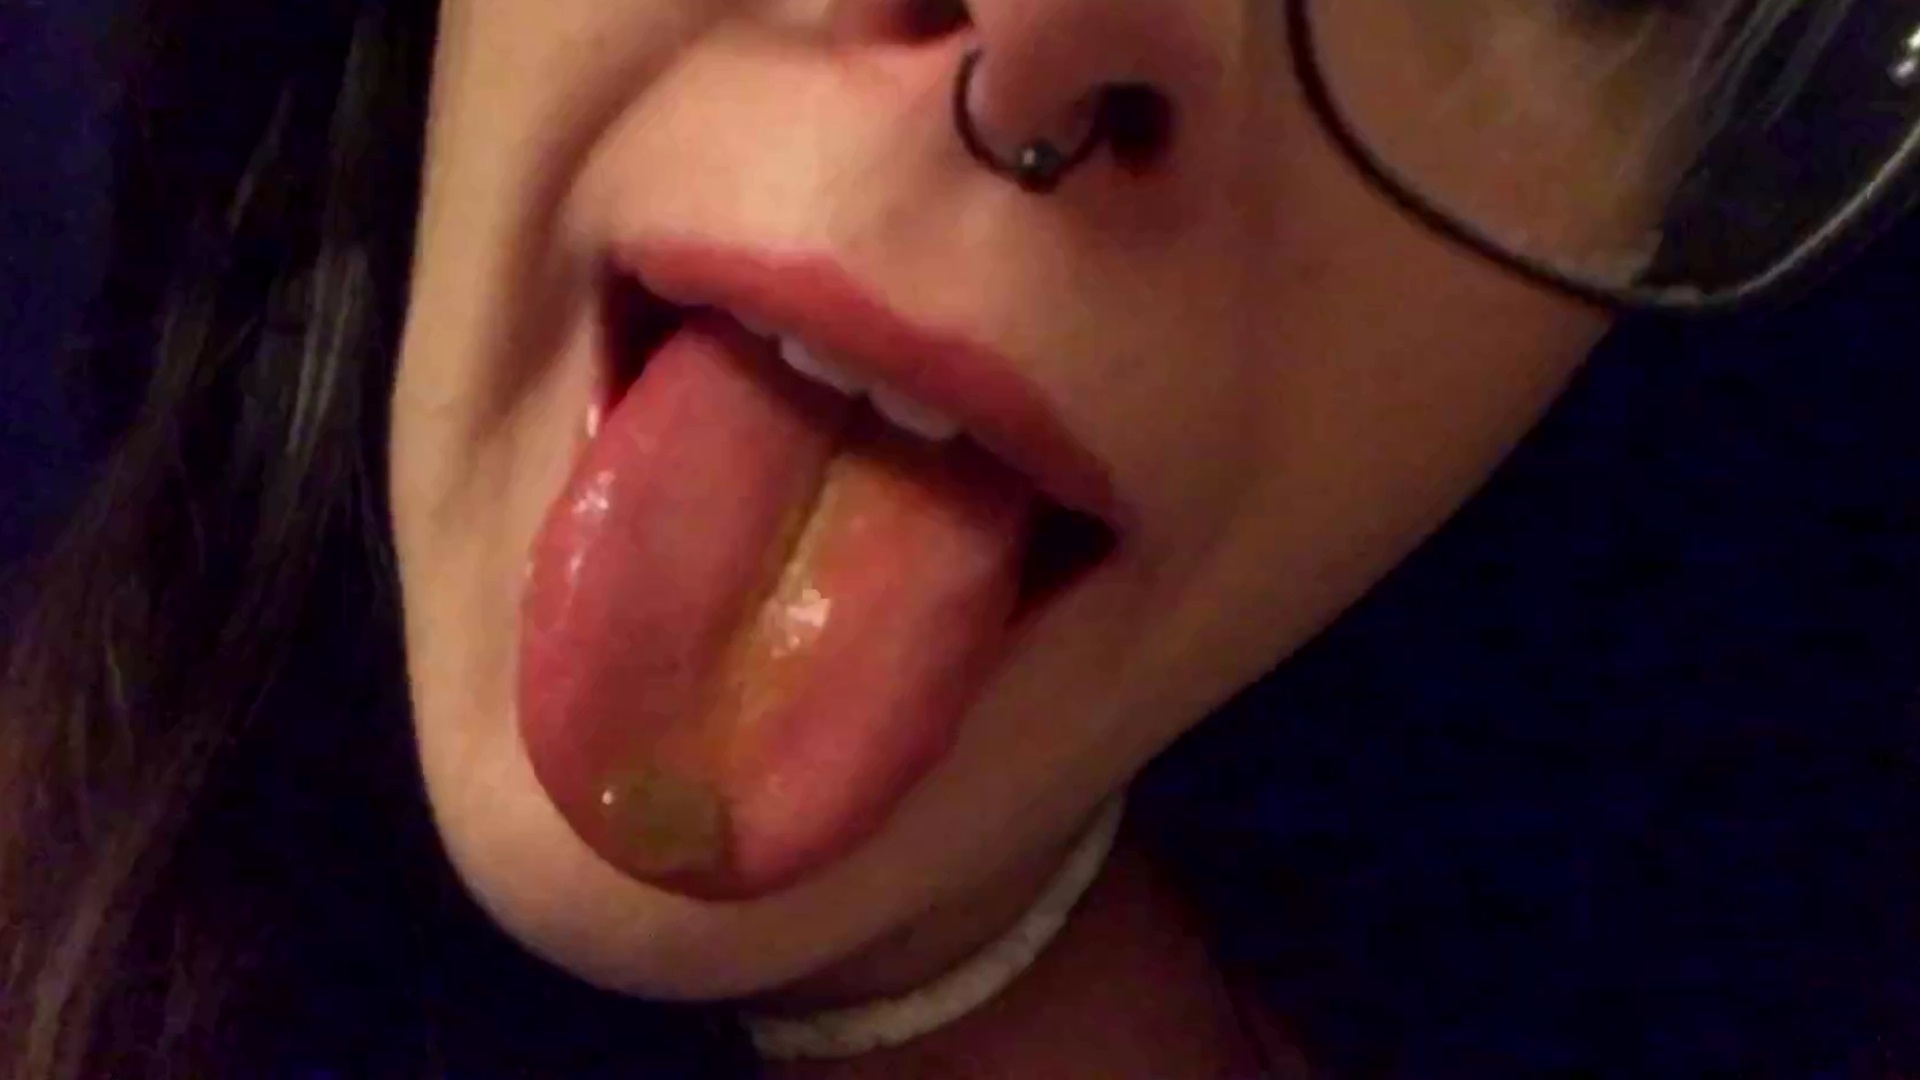 Ass To Mouth Atm A2m - Dirty ass to mouth - ThisVid.com